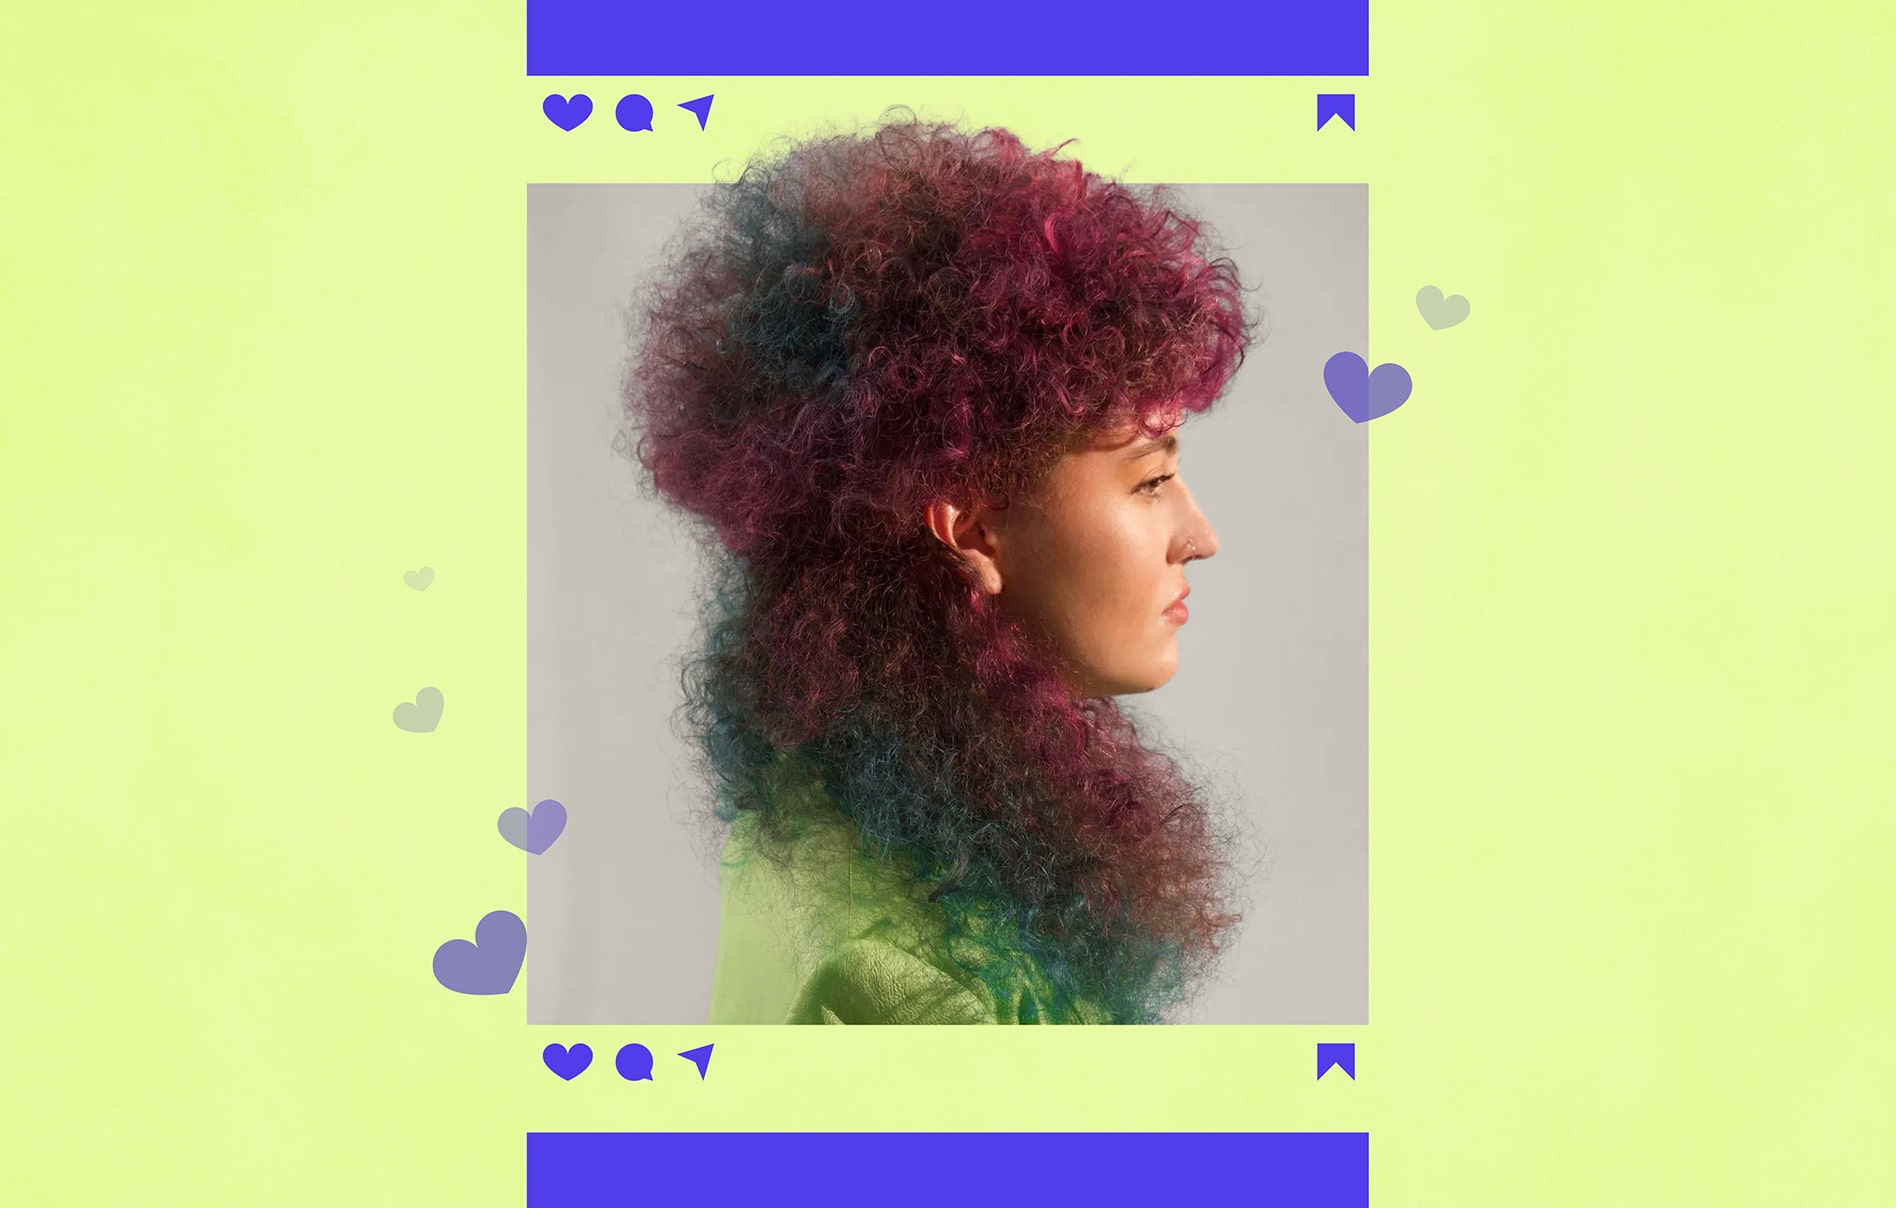 Image of a person with multicolor hair featured in an abstracted Instagram feed